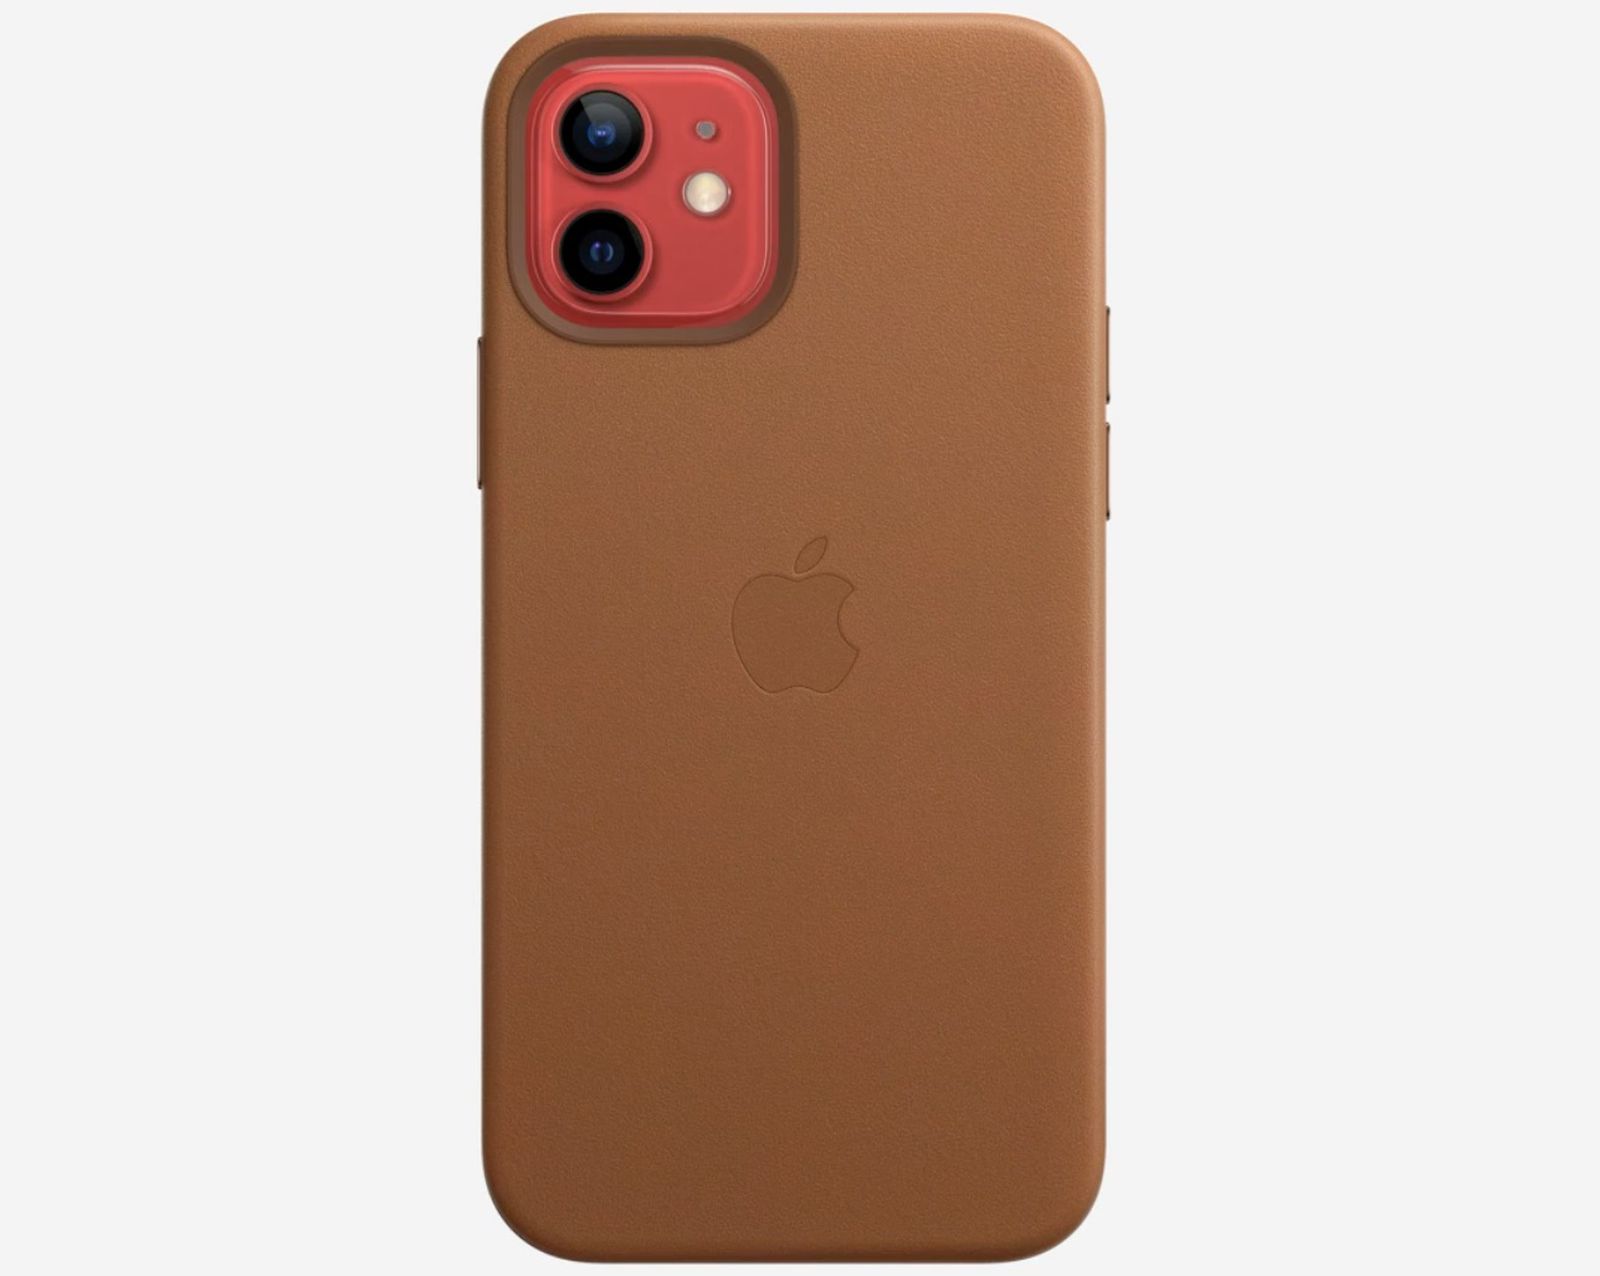 Leather Cases for iPhone 12 and 12 Pro Coming on November 6 